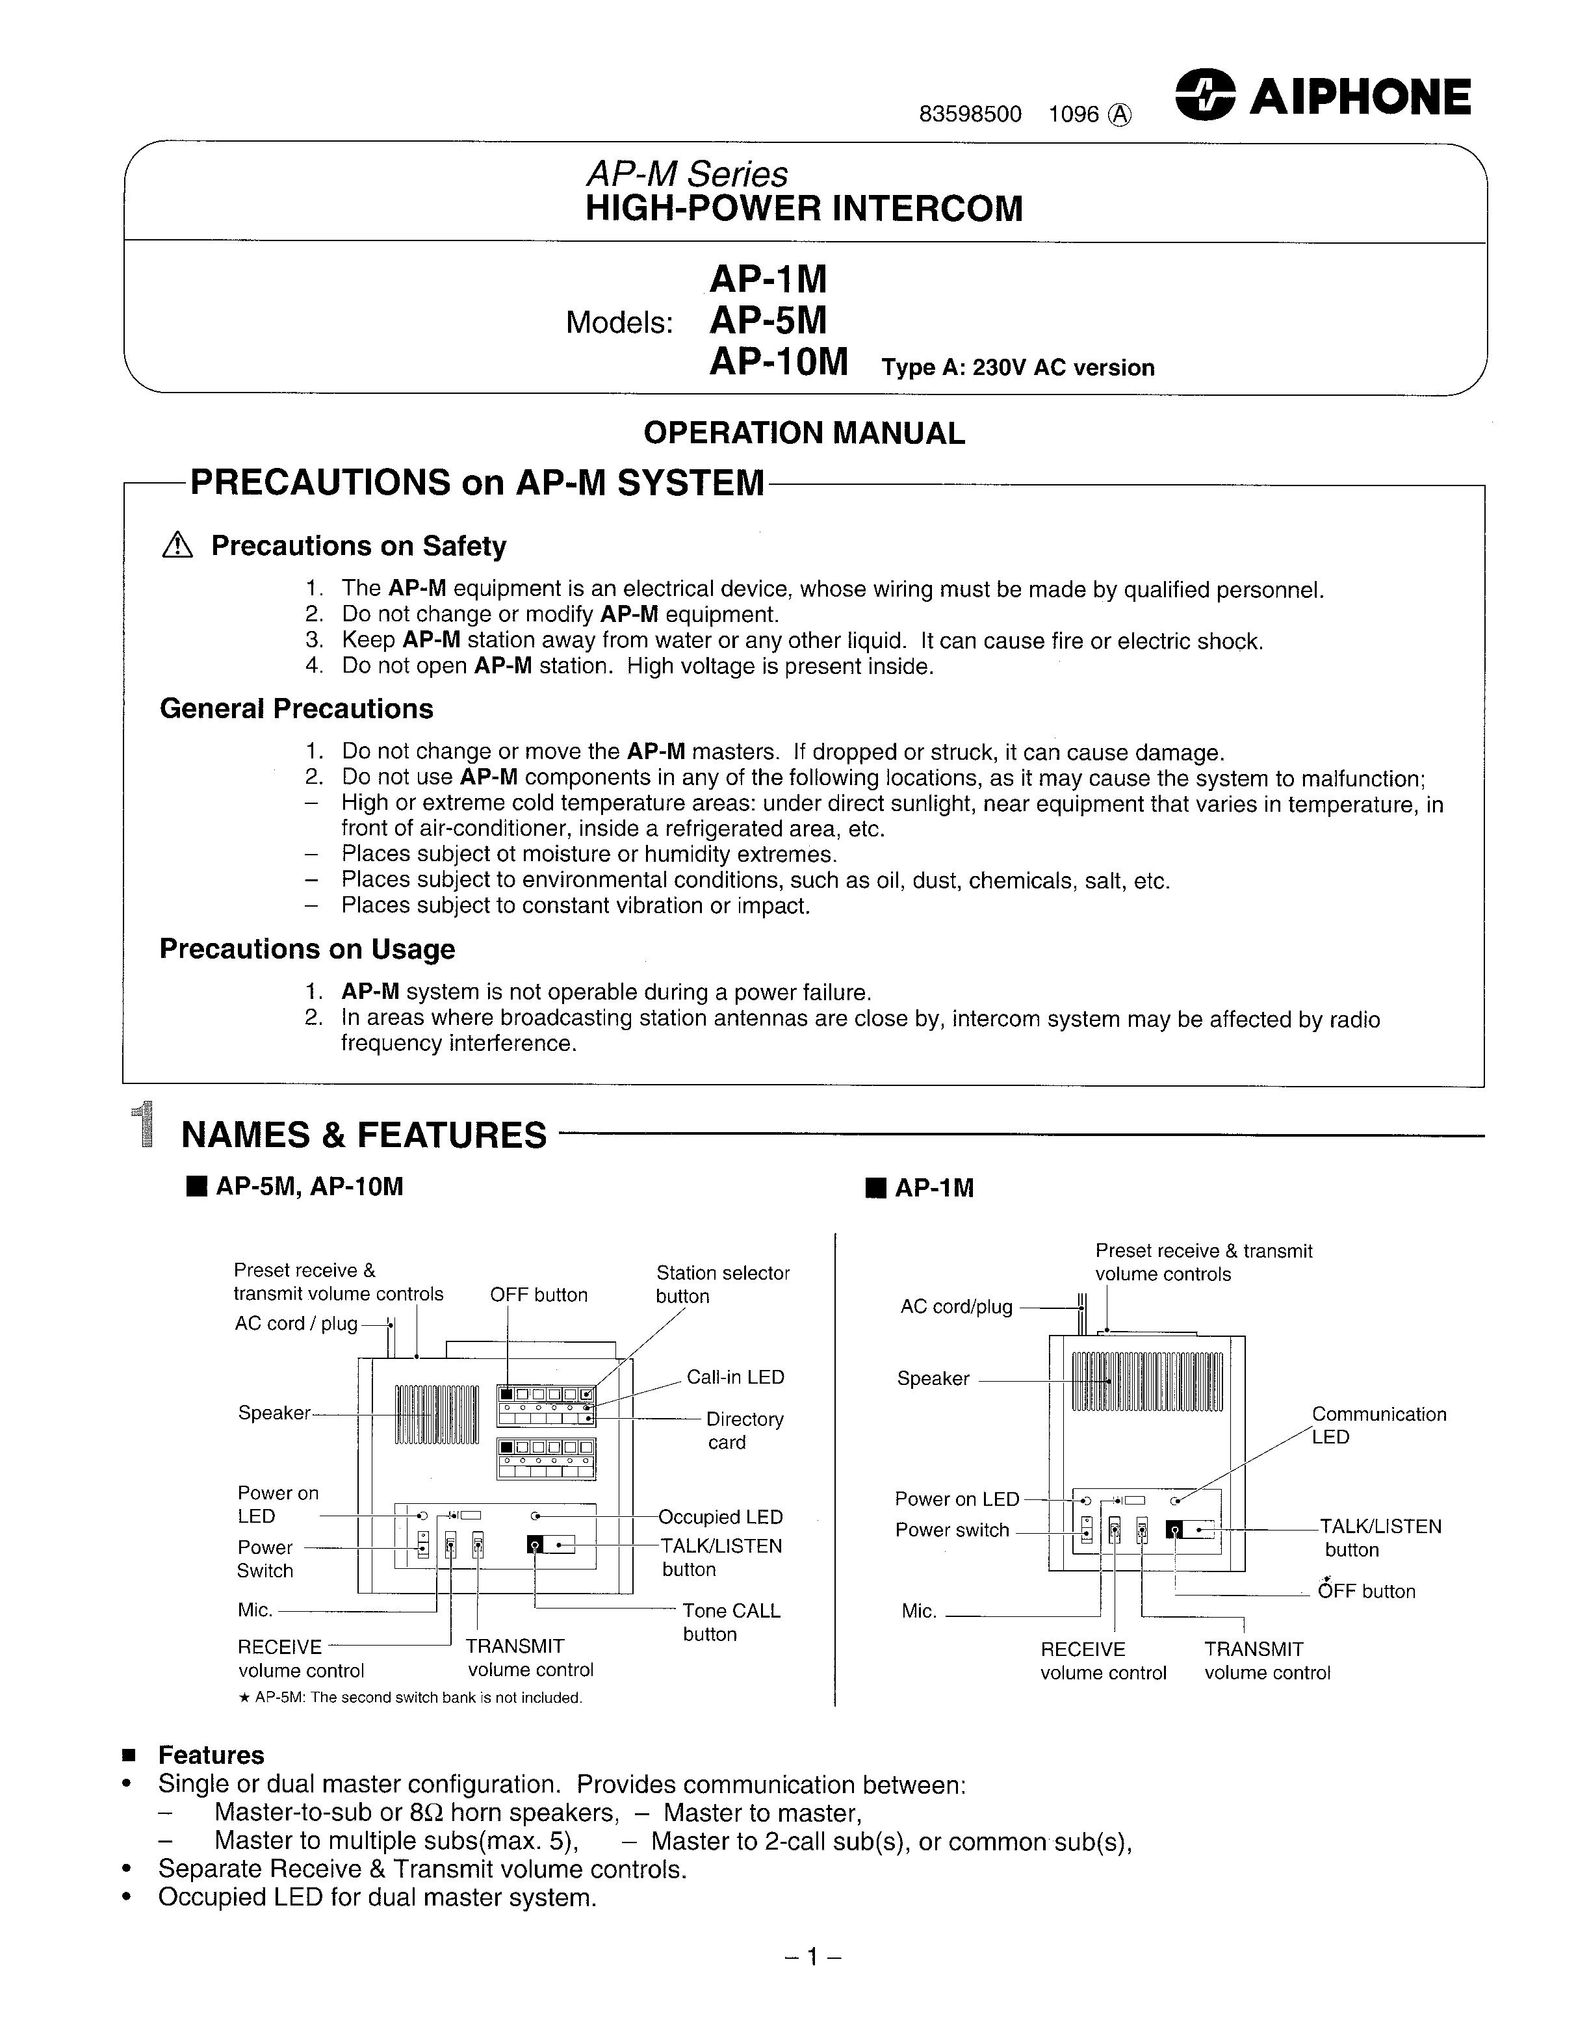 Aiphone AP-10M Home Security System User Manual